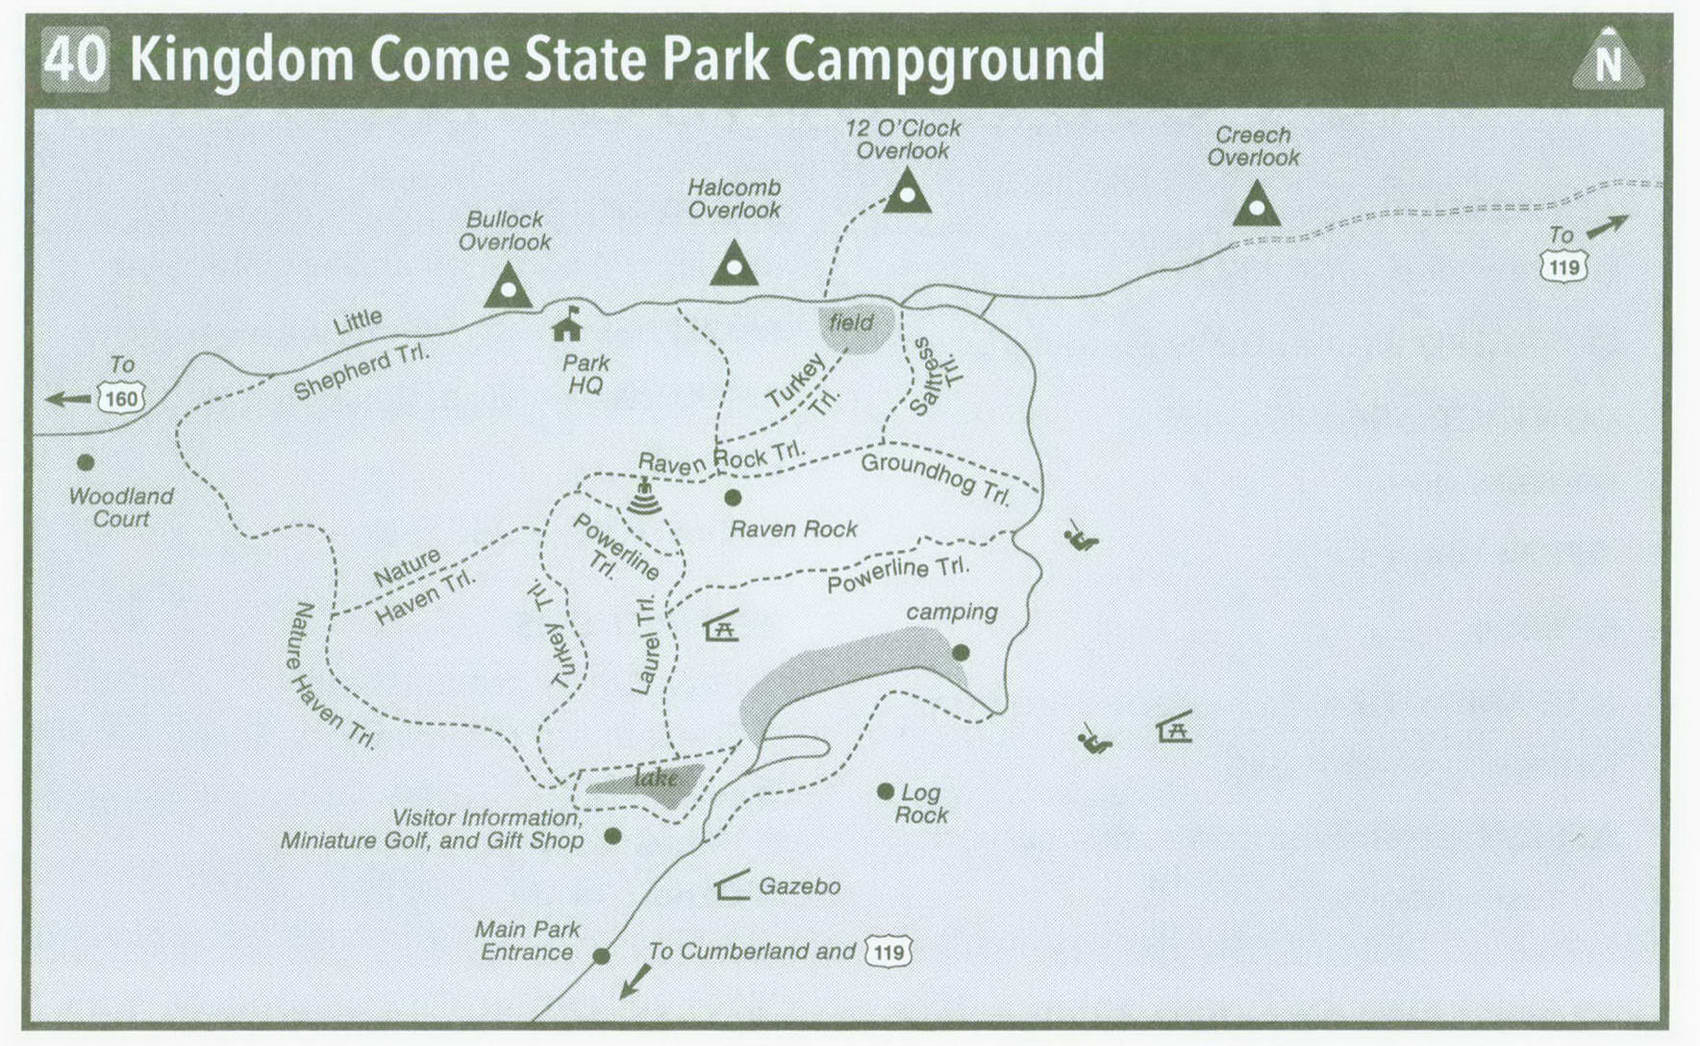 Plan of Kingdom Come State Park Campground